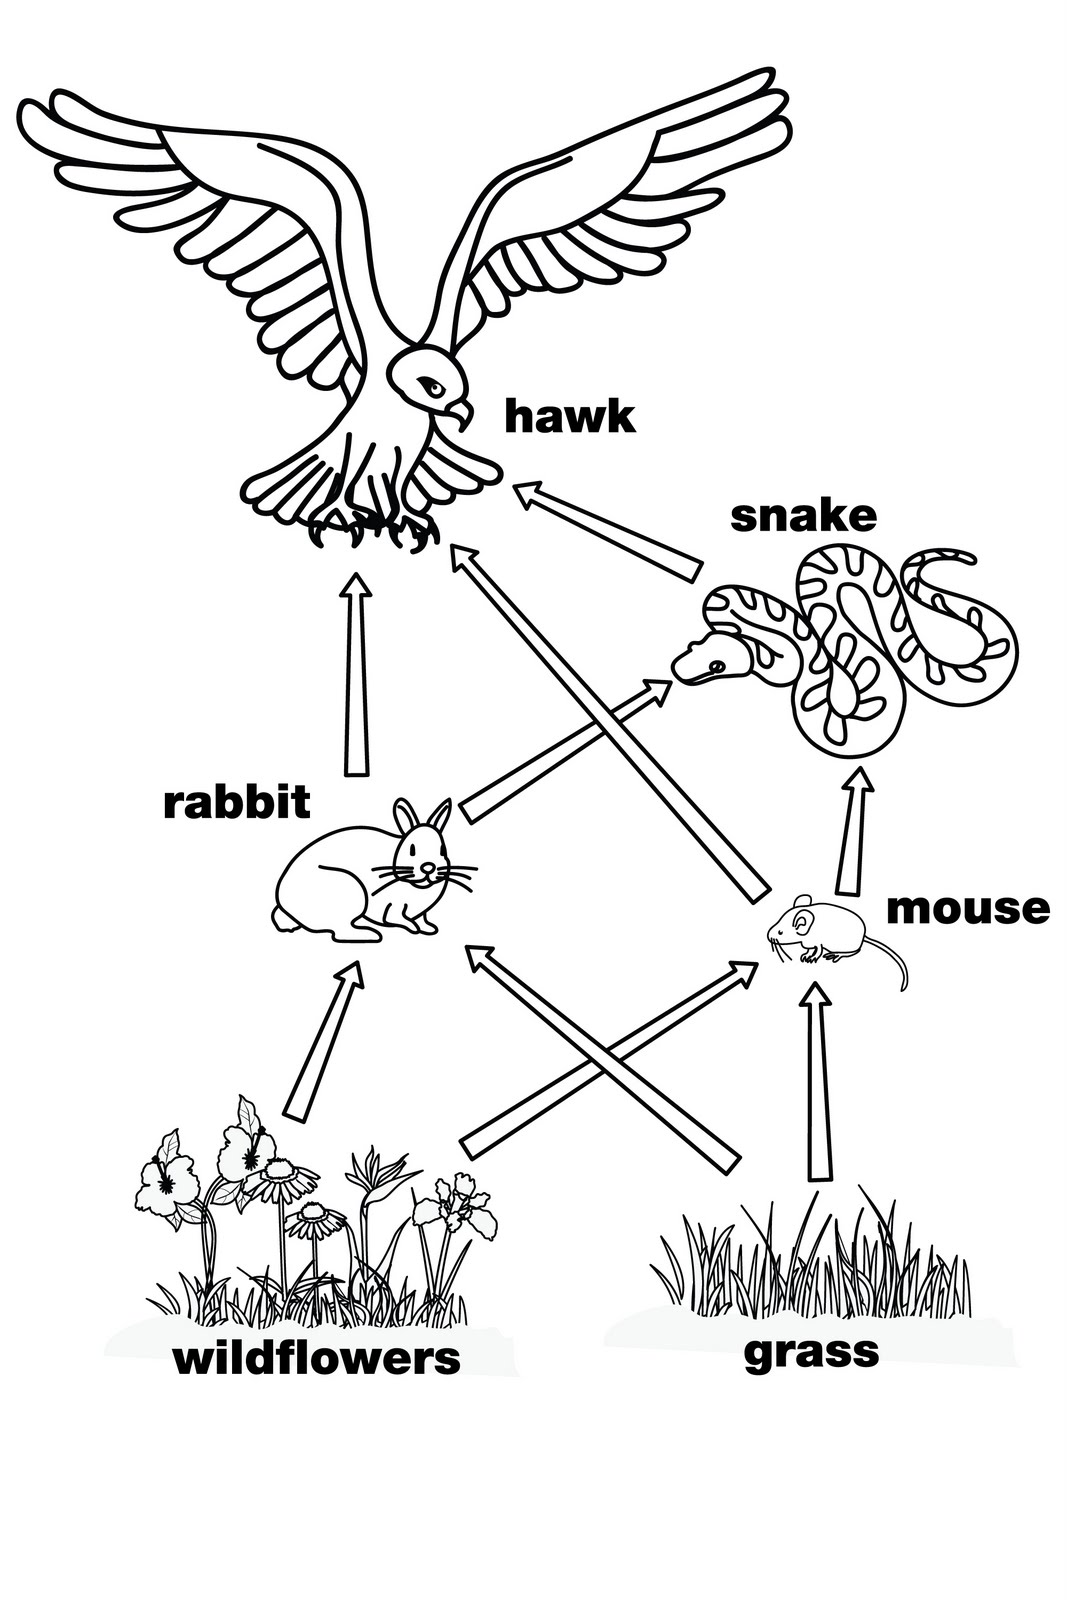 Food Chain Clipart Black And White.